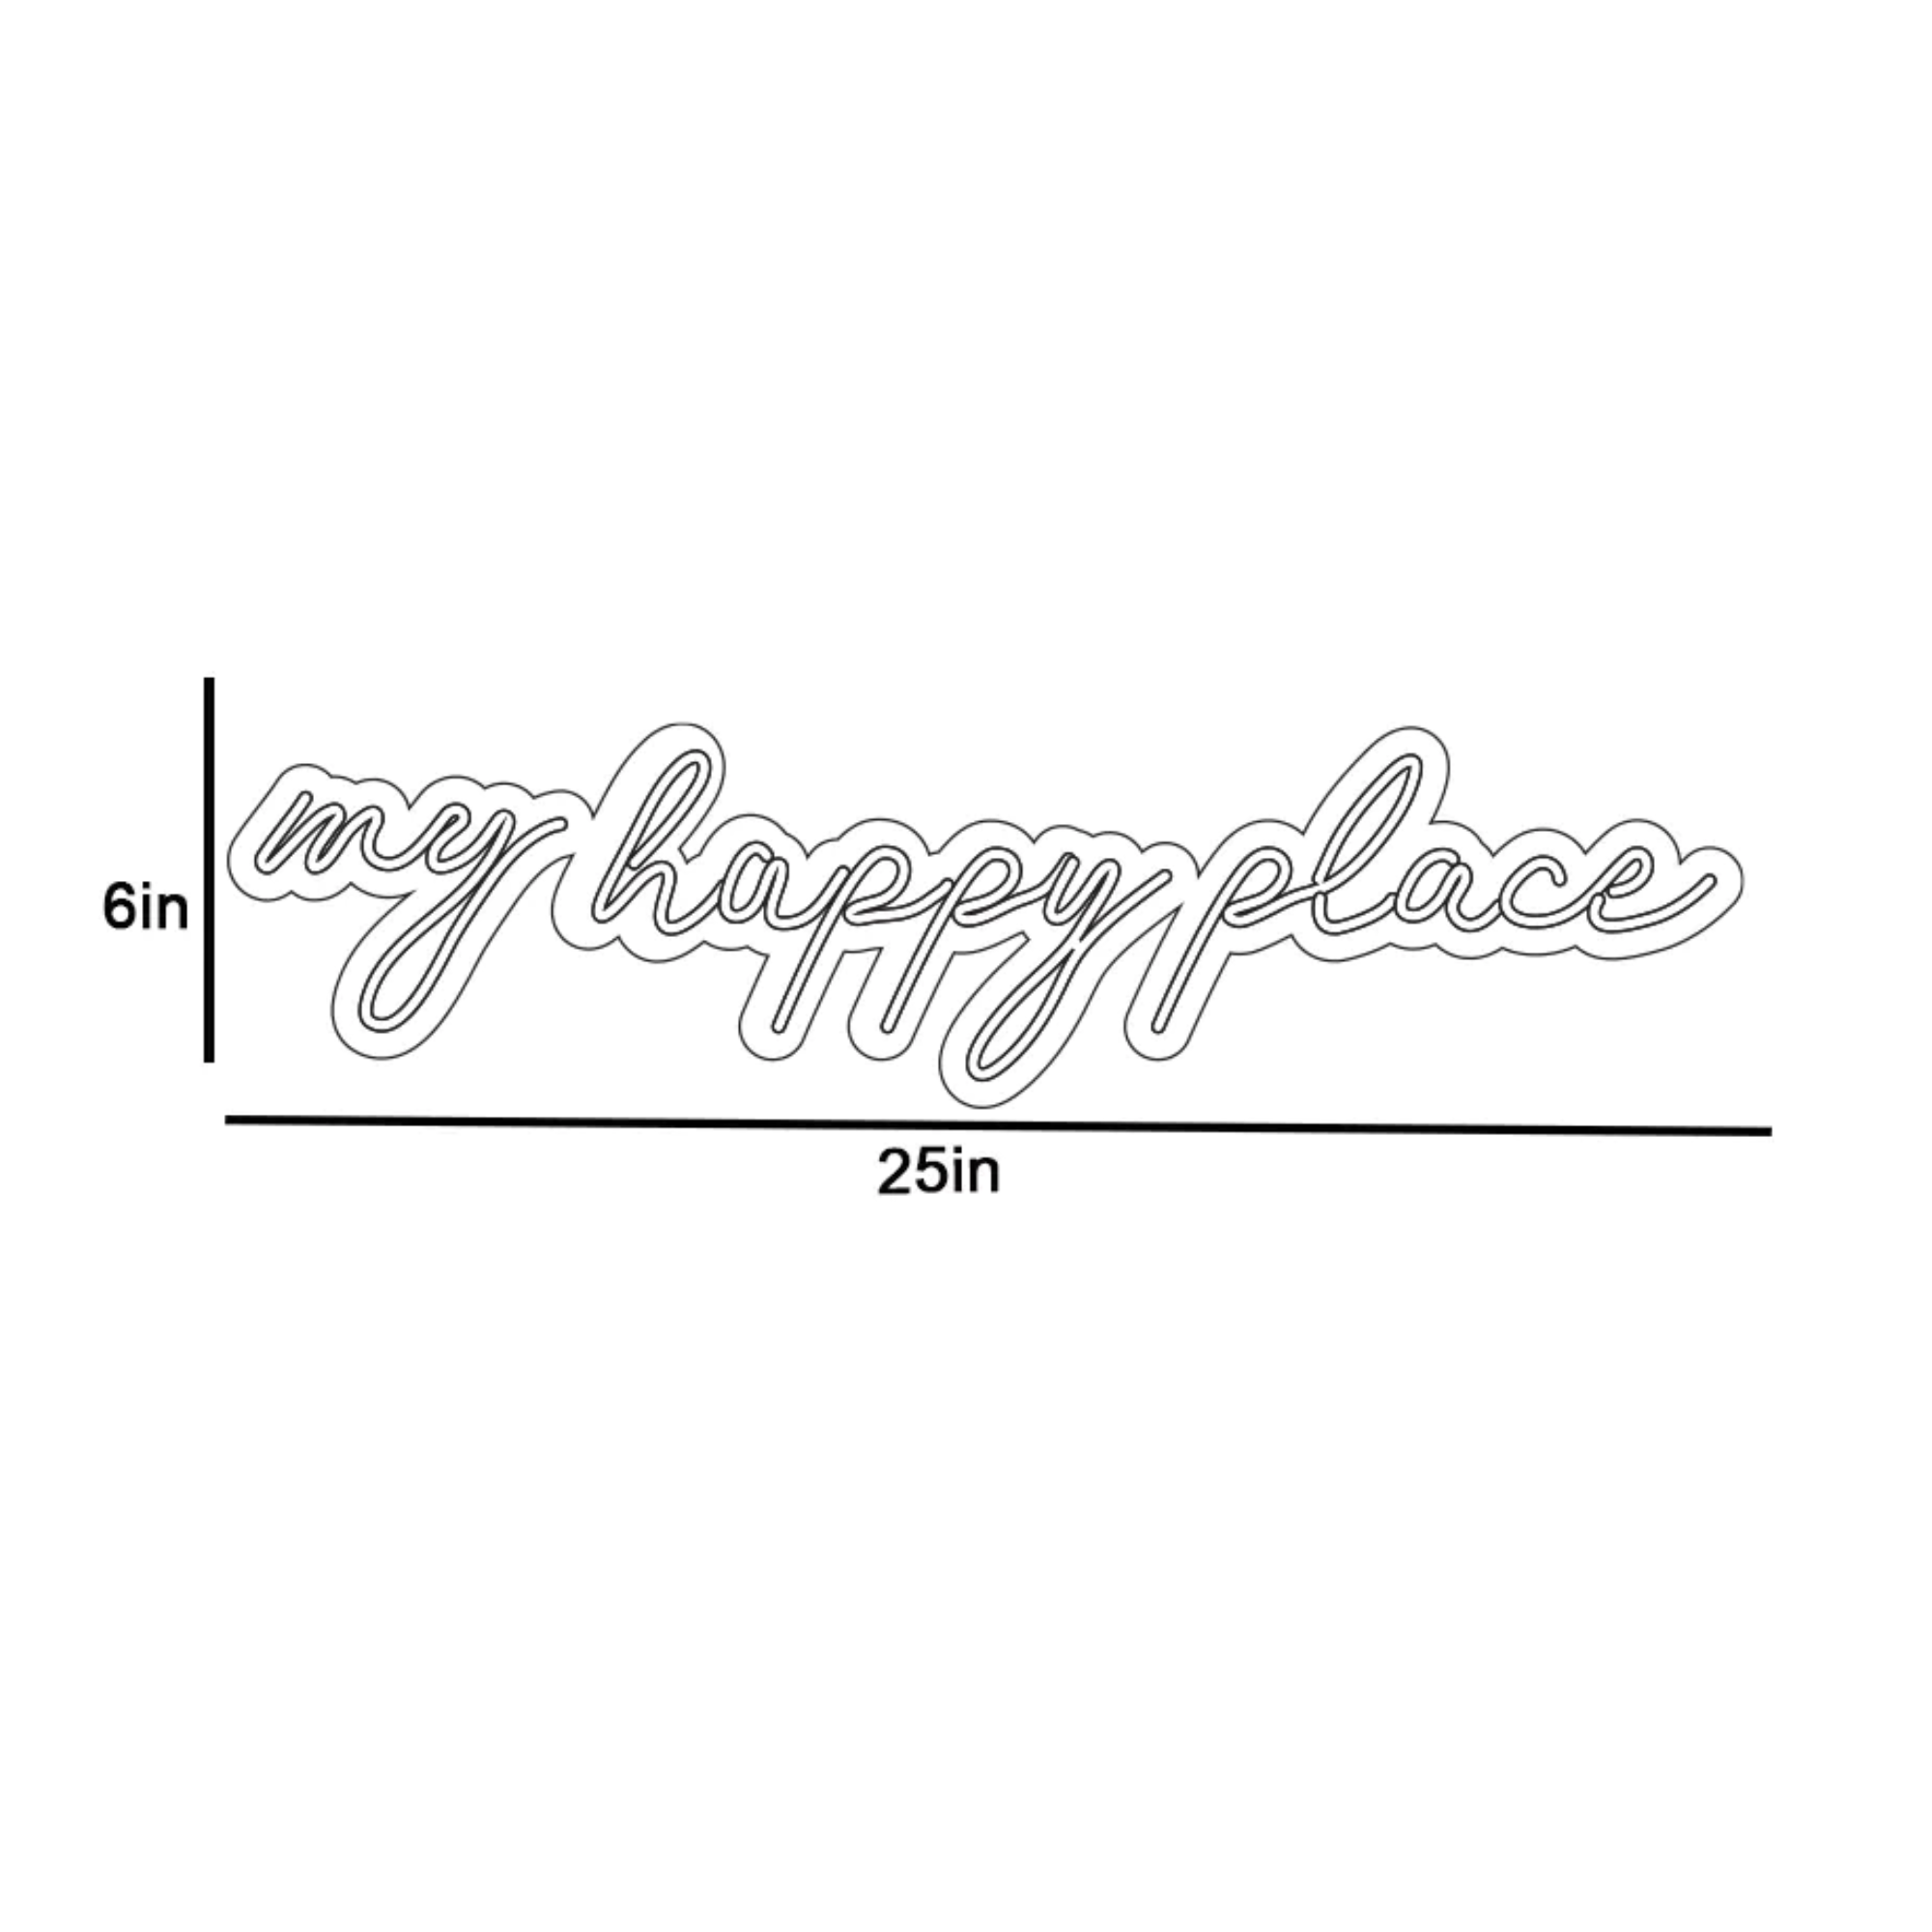 My Happy Place Text Design Neon LED Light